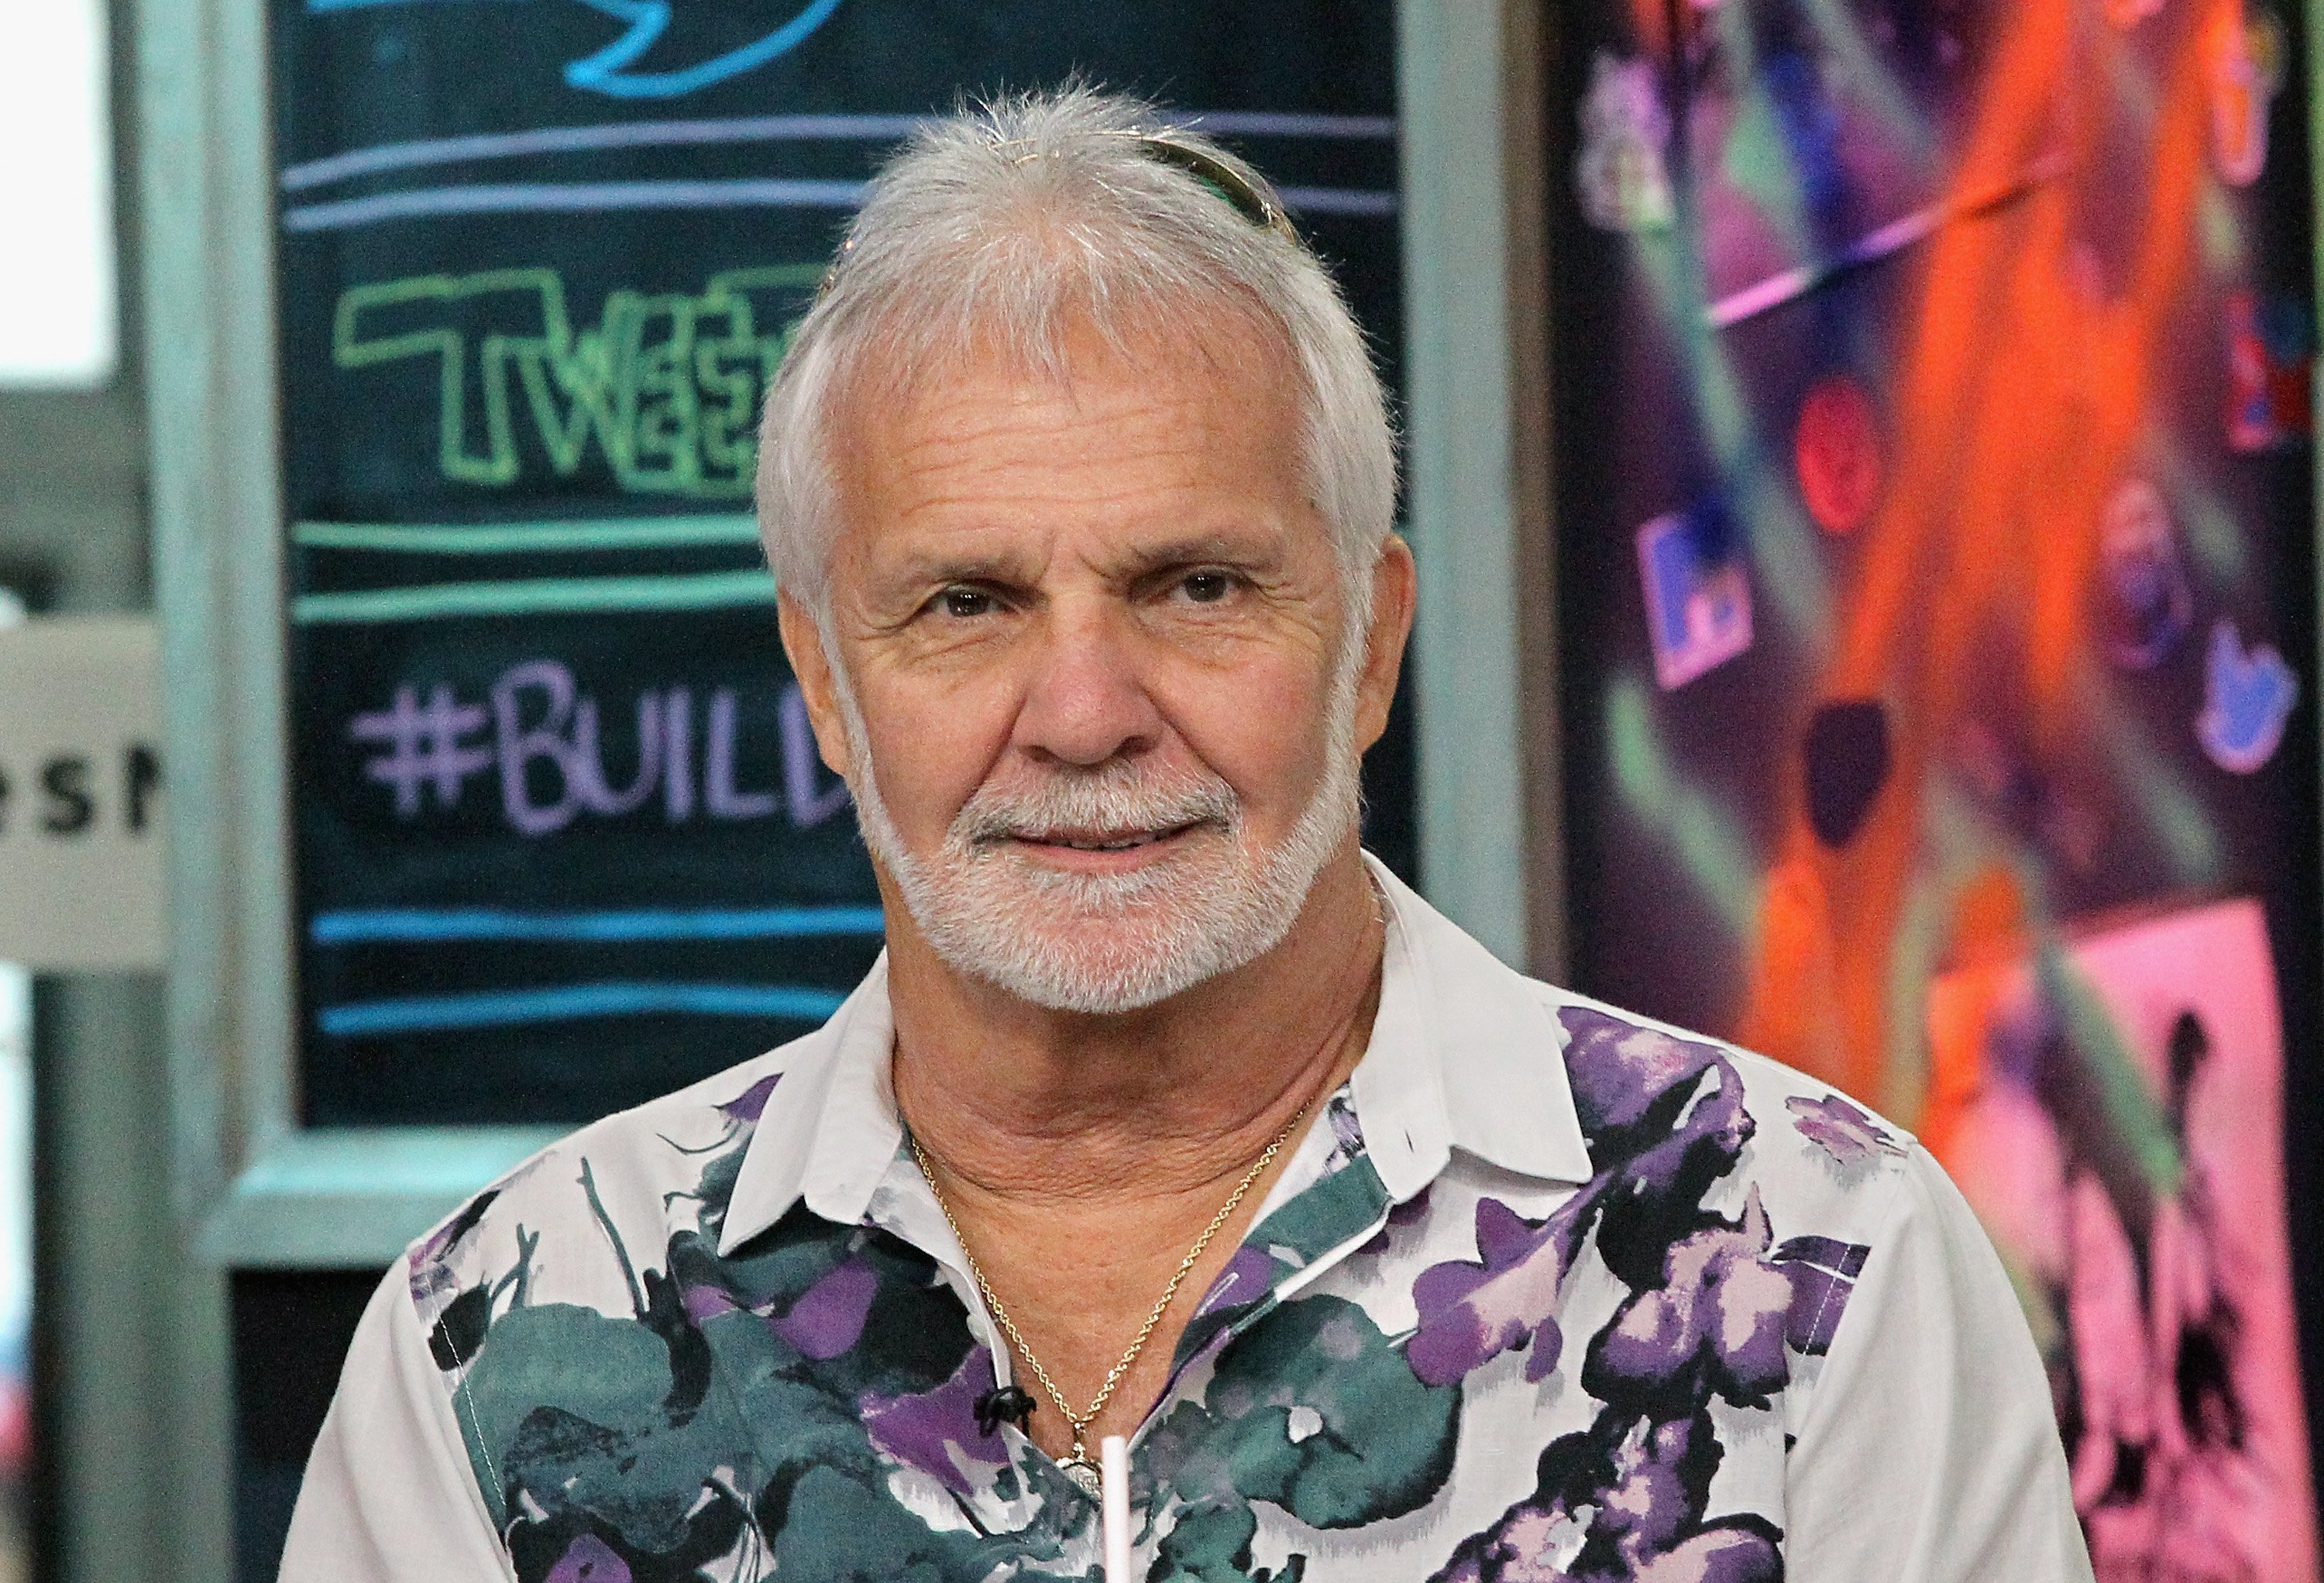 Captain Lee Rosbach attends the Build Brunch to discuss "Below Deck" 2 at Build Studio on October 3, 2018 in New York City | Photo: Getty Images